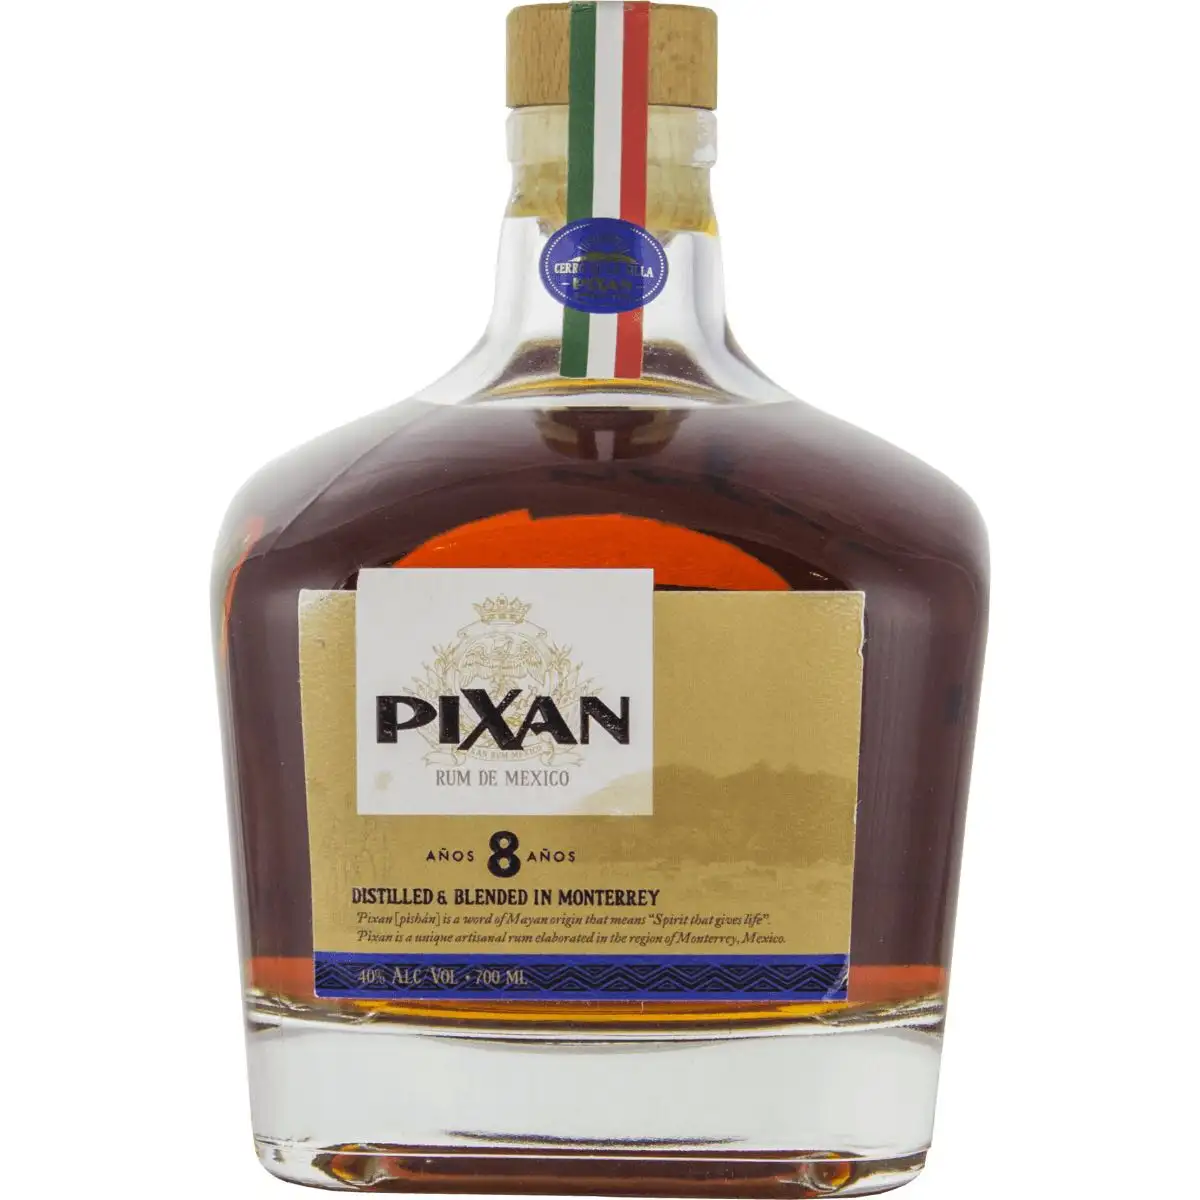 Image of the front of the bottle of the rum Pixan - 8 Años